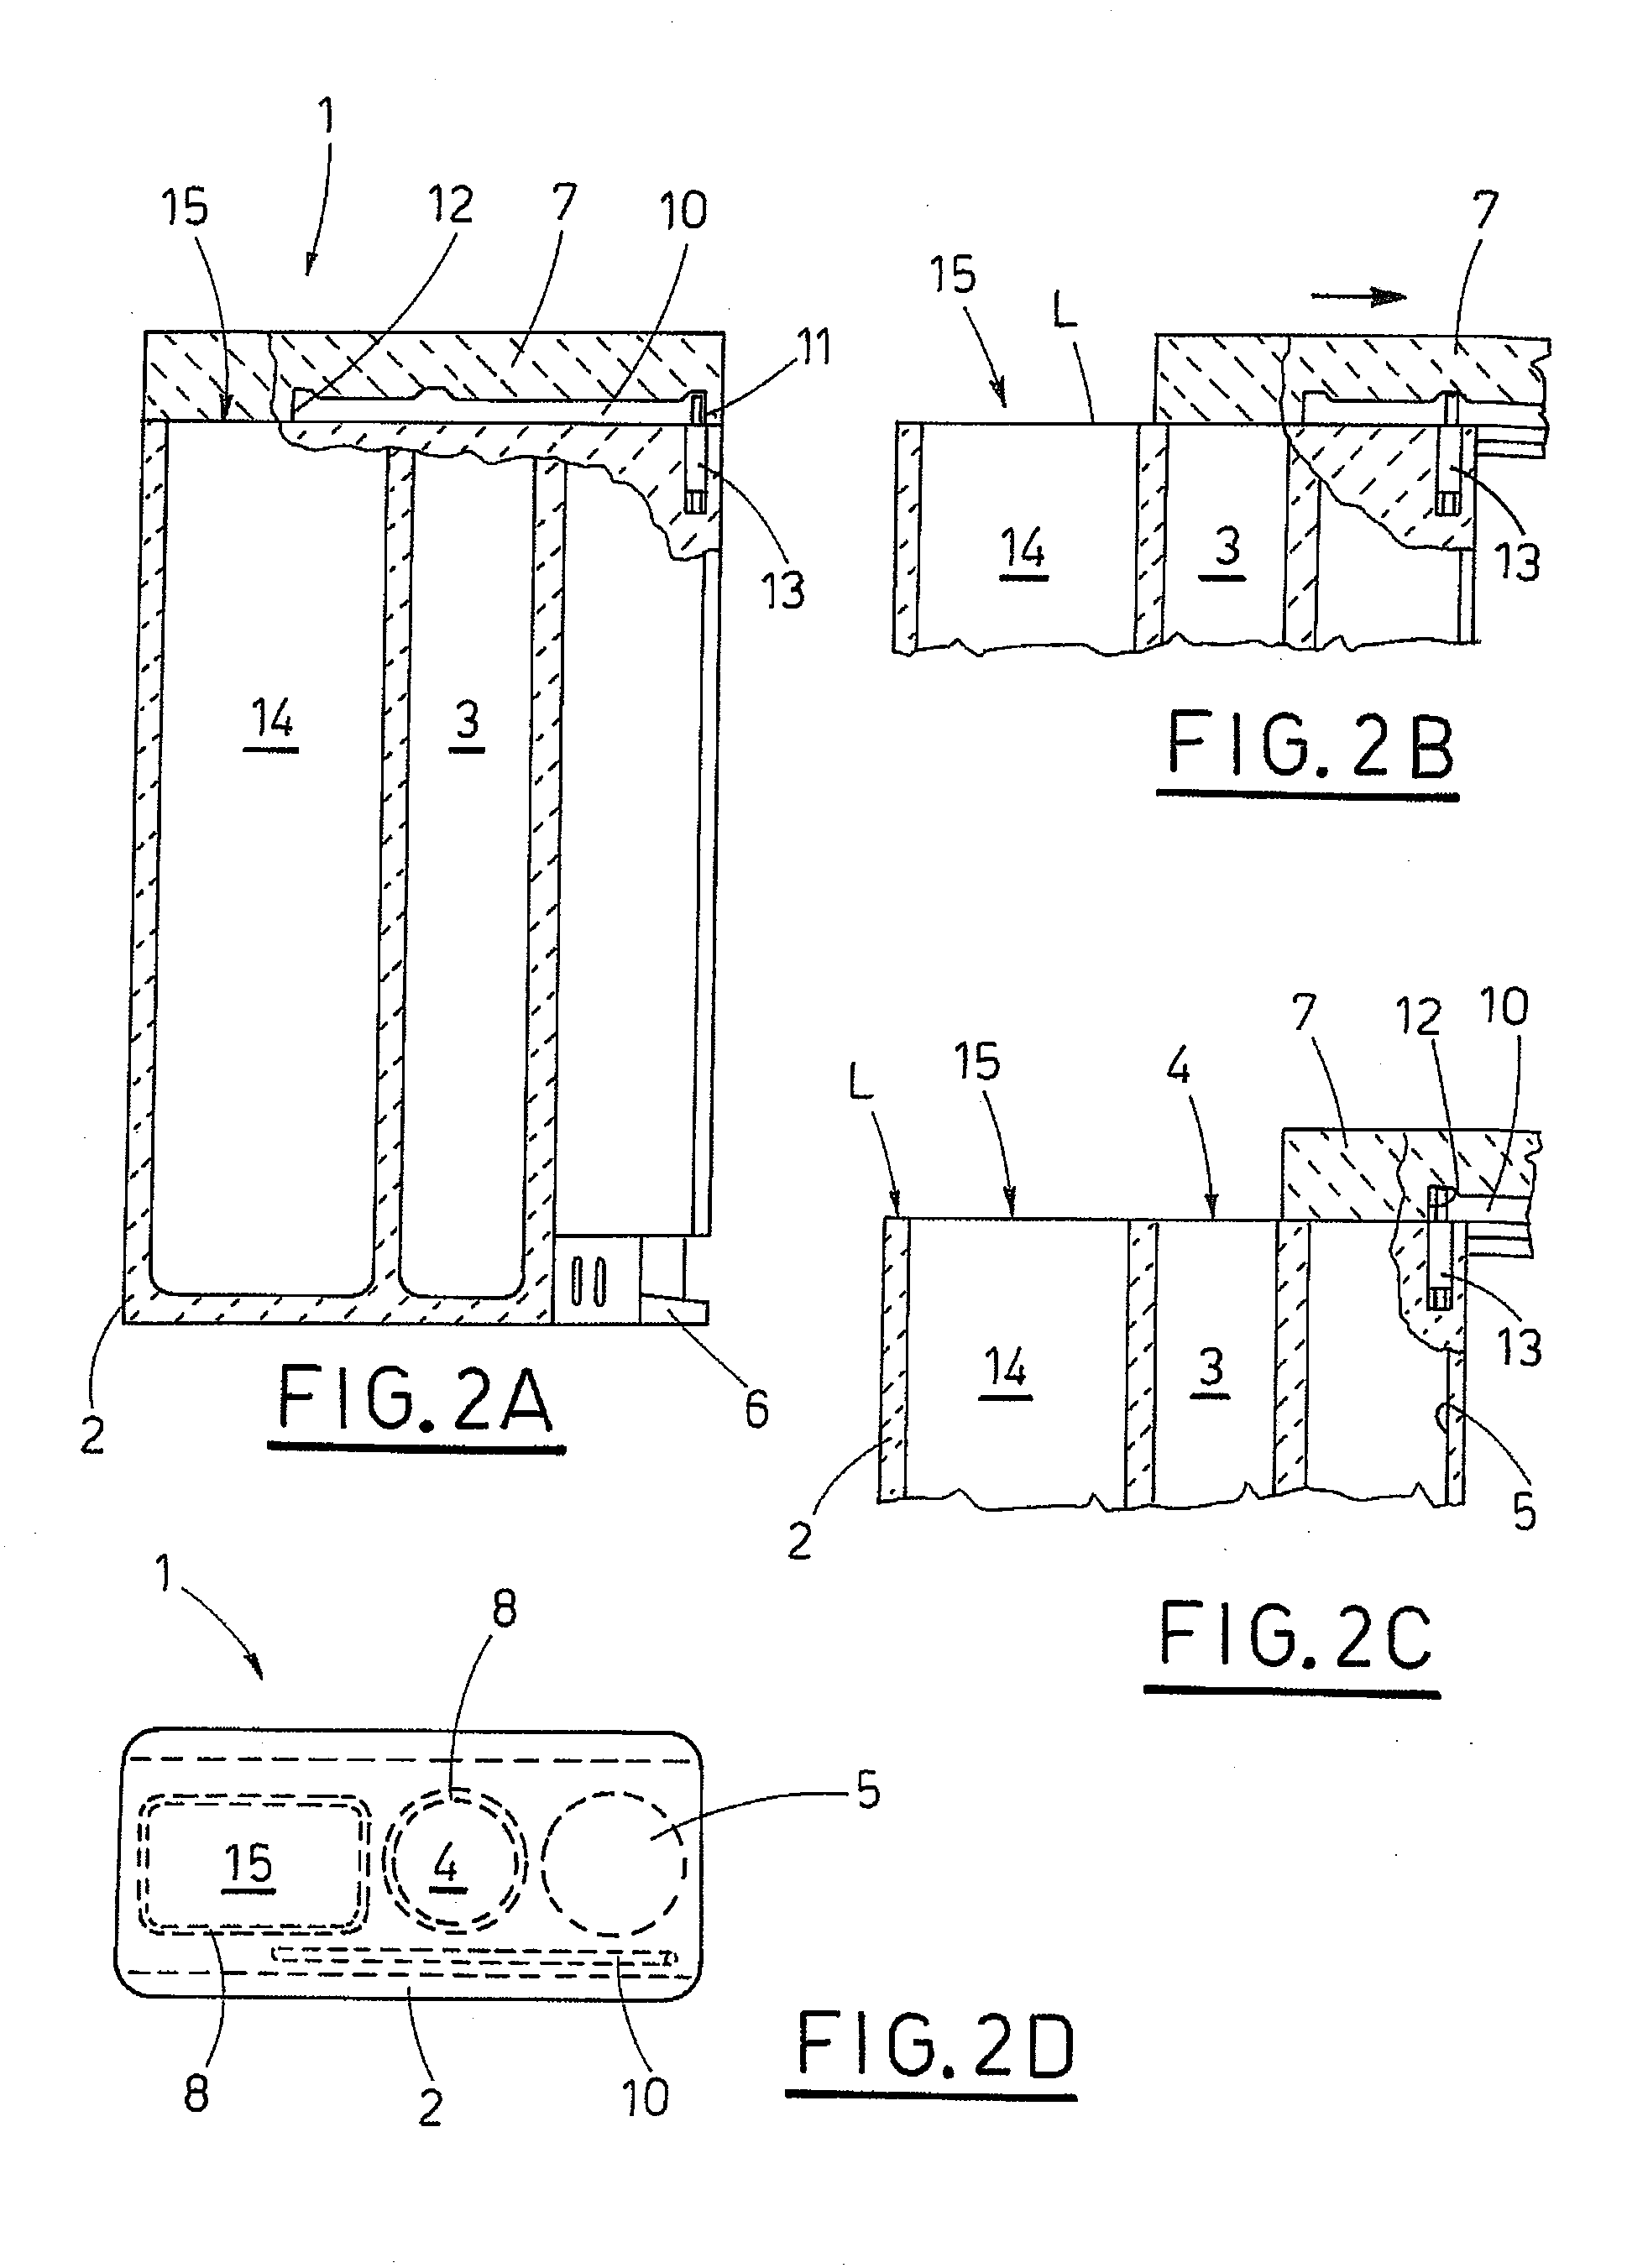 Portable Ecological Article for Extinguishing a Cigarette and for Containing Residues of the Cigarette